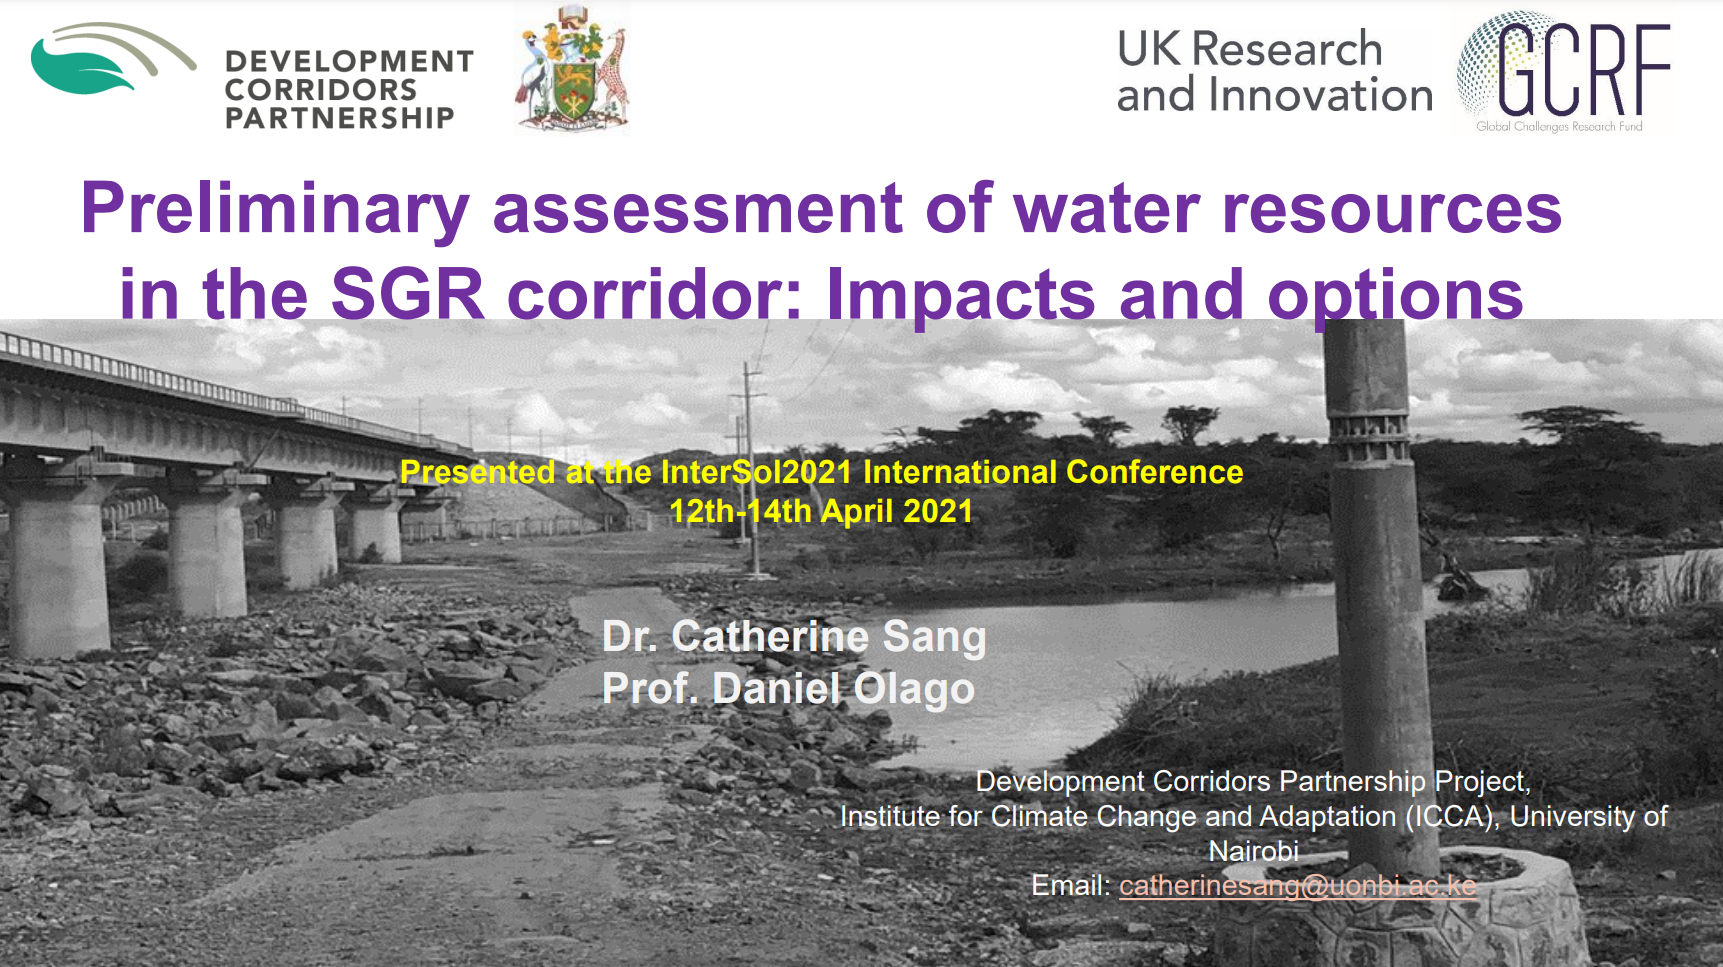 Preliminary assessment of water resources in the SGR corridor: Impacts and options.